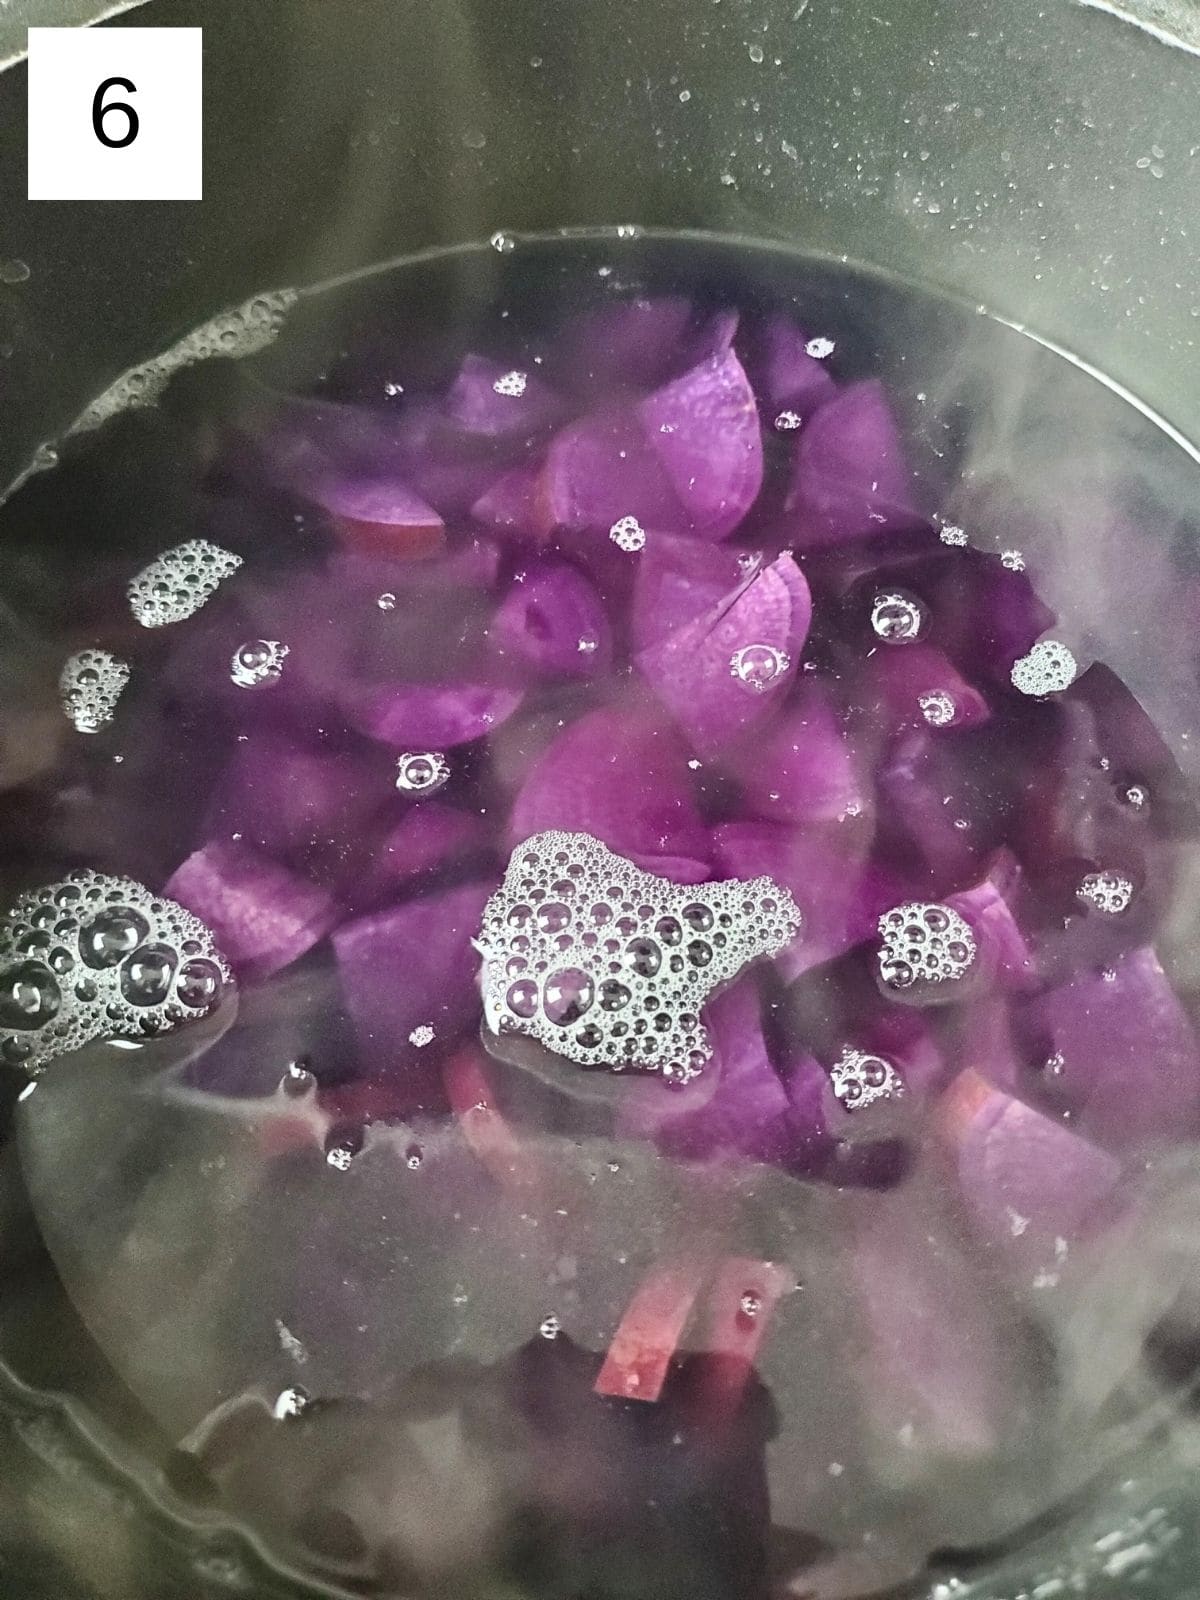 slices of purple sweet potatoes in a boiling pot of salted water.